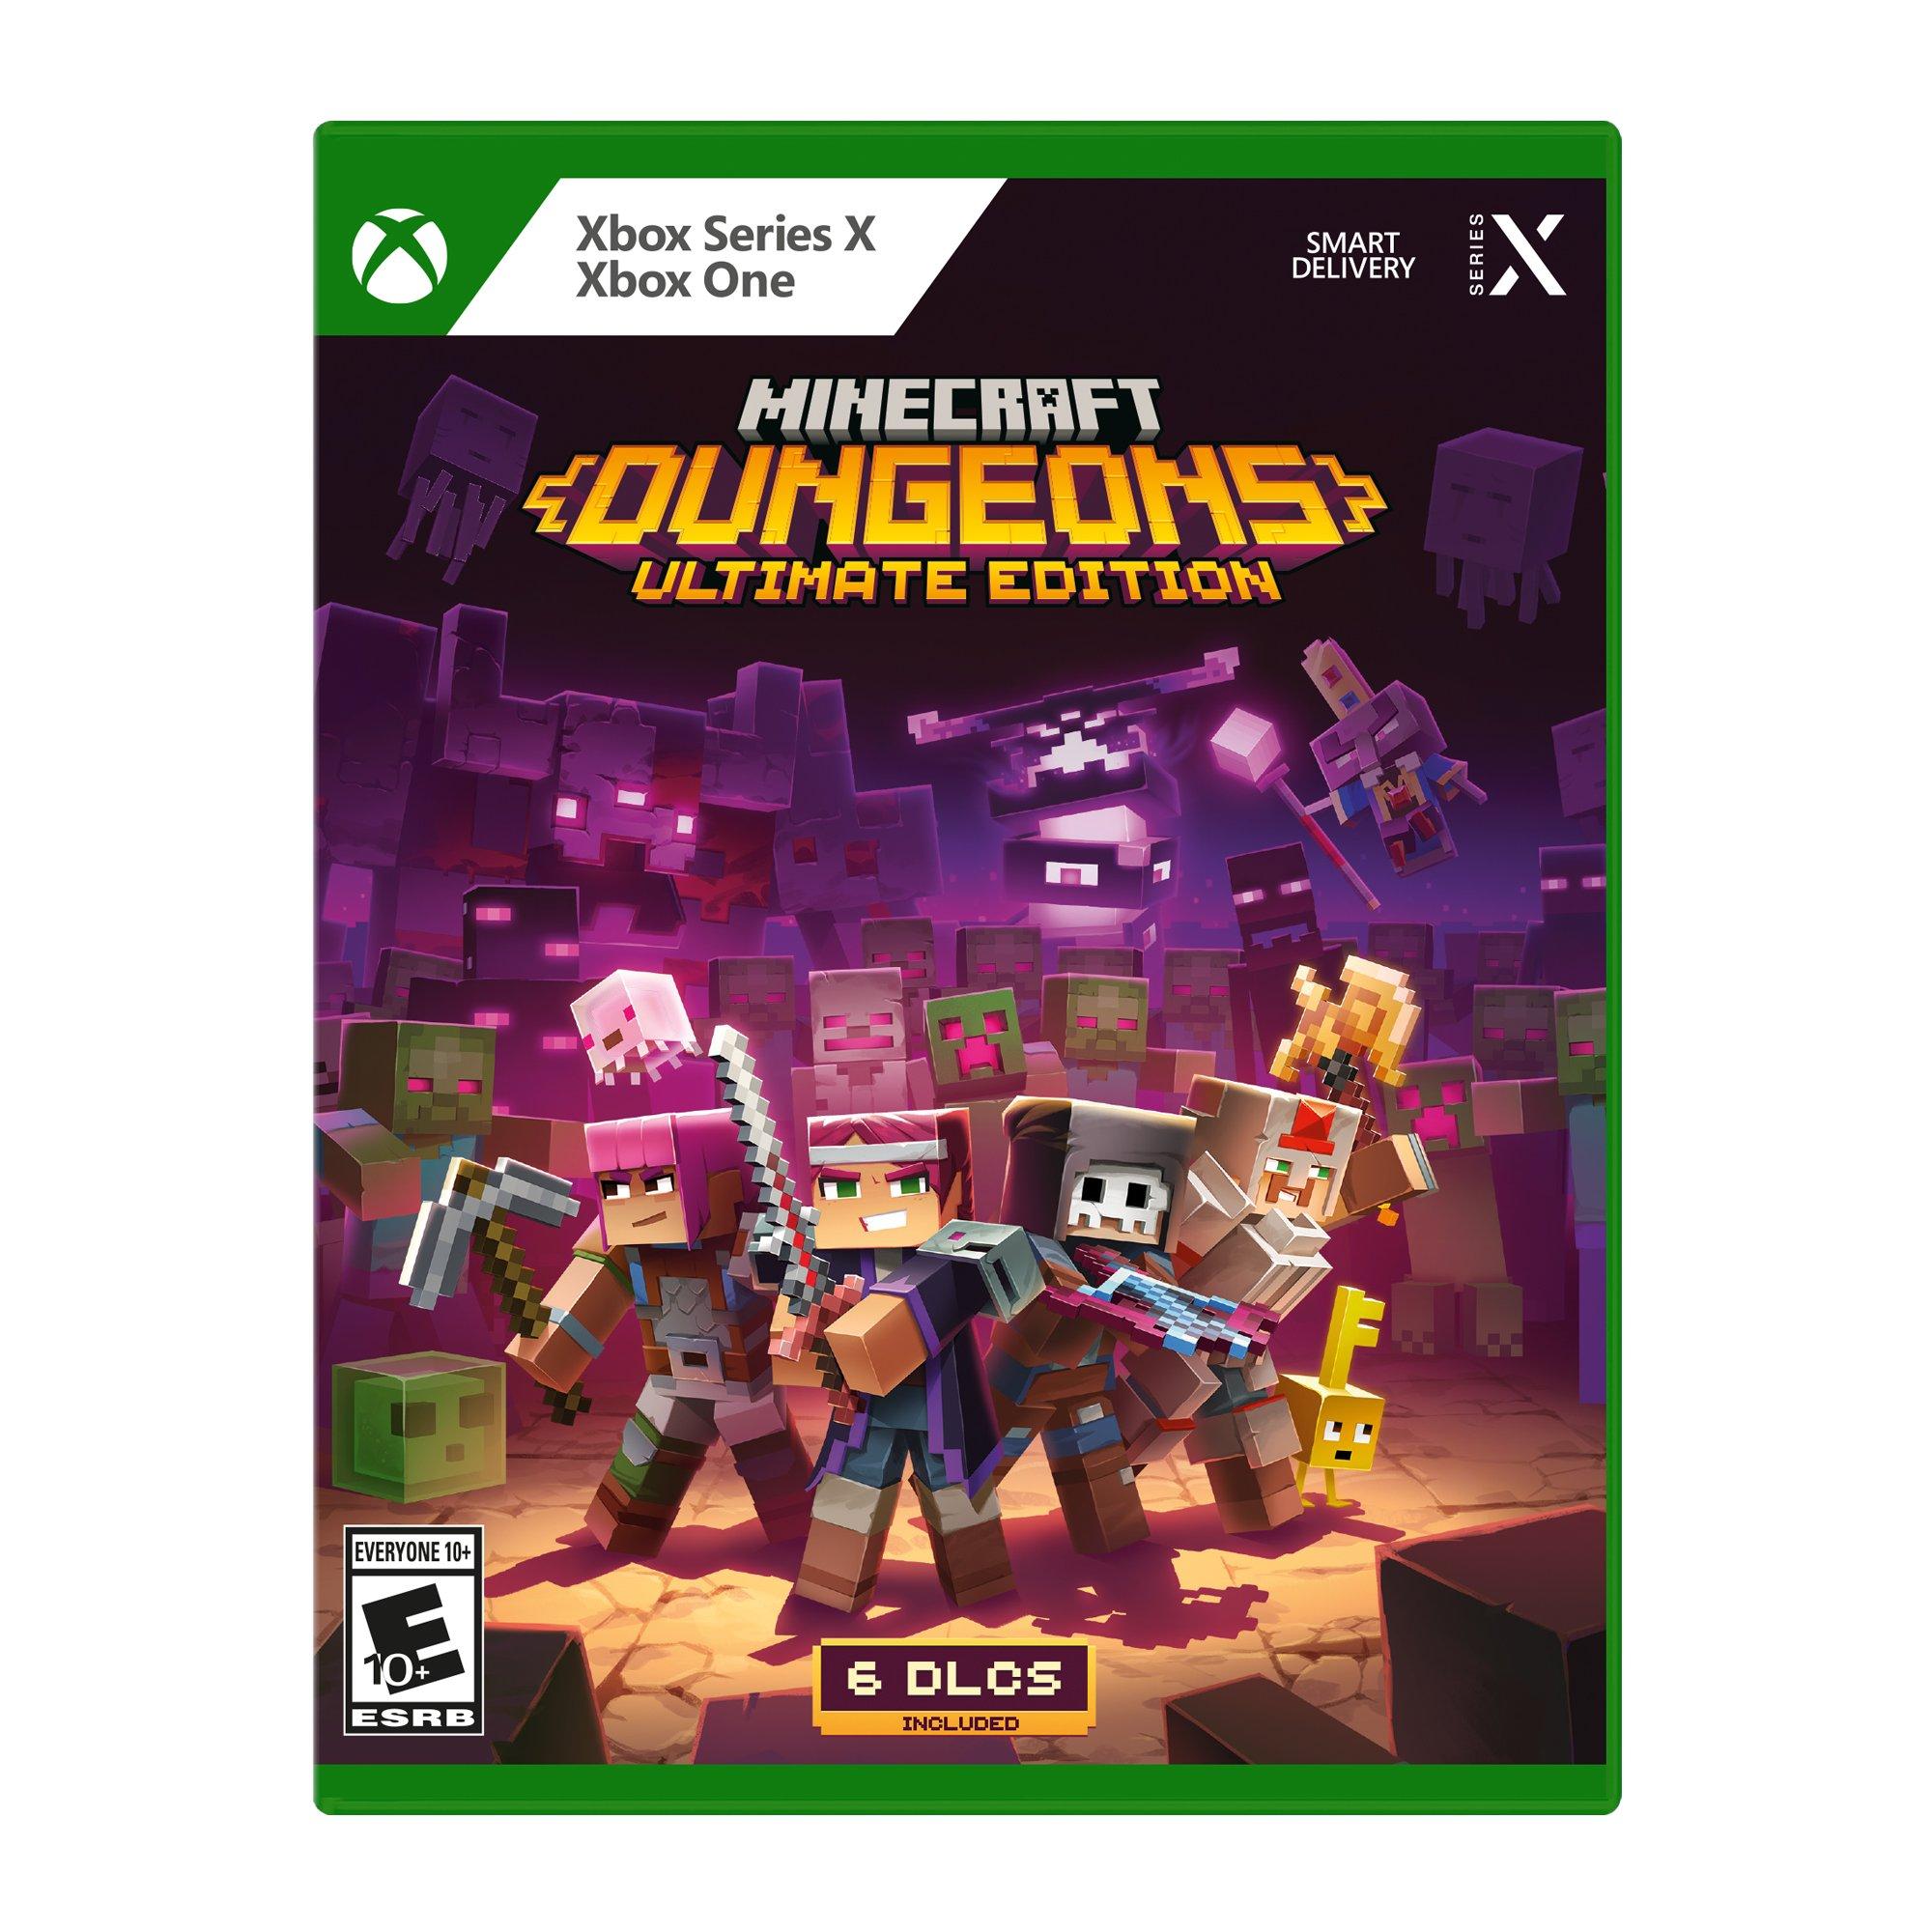 Minecraft Dungeons Ultimate Edition - Xbox Series X/S | Xbox Series X |  GameStop